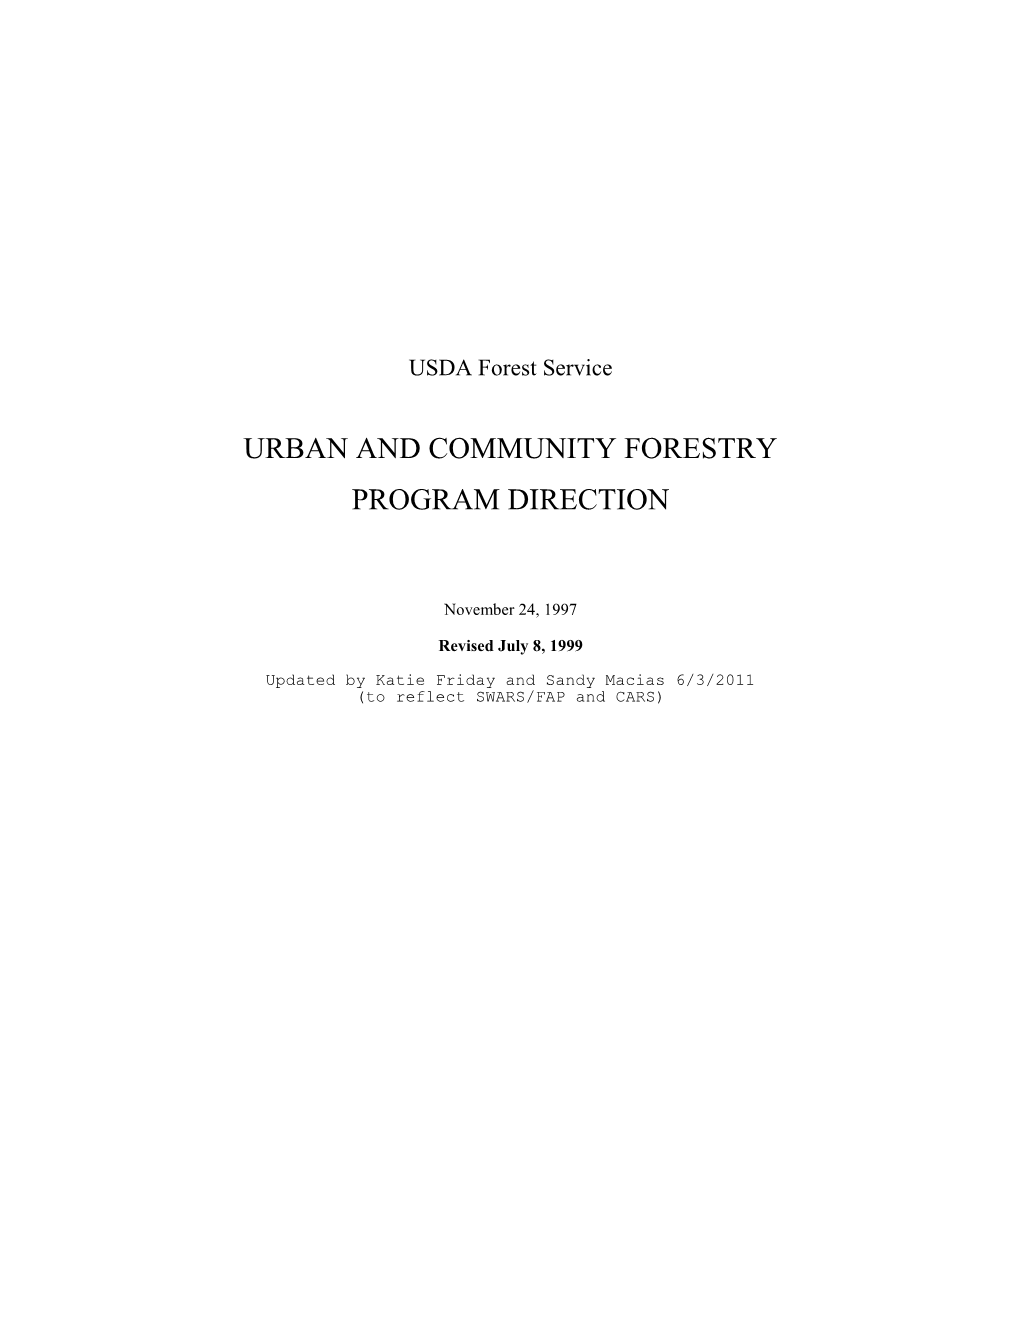 Urban and Community Forestry Program Direction